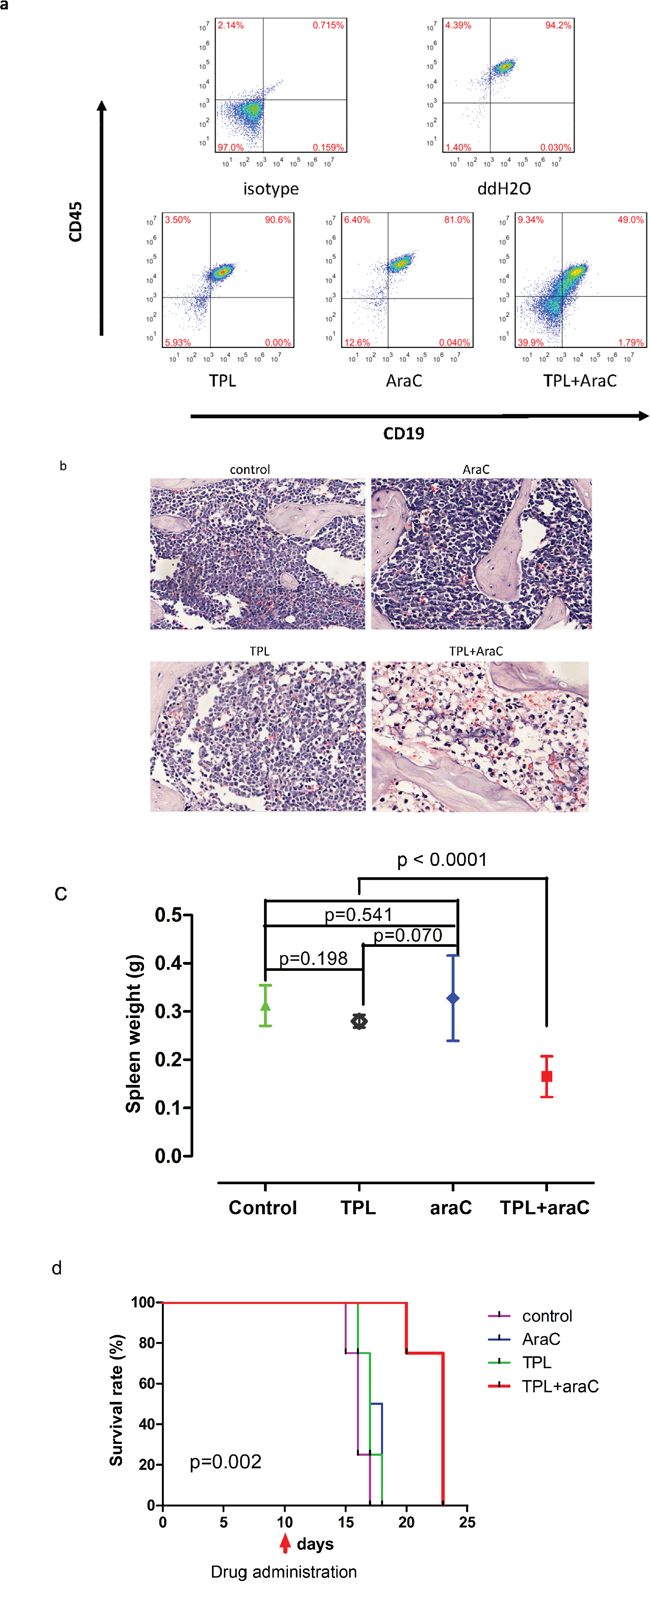 The regimen combining TPL with araC reduces tumor burden and prolongs animal survival in a mouse xenograft model of NALM-6/R cells.